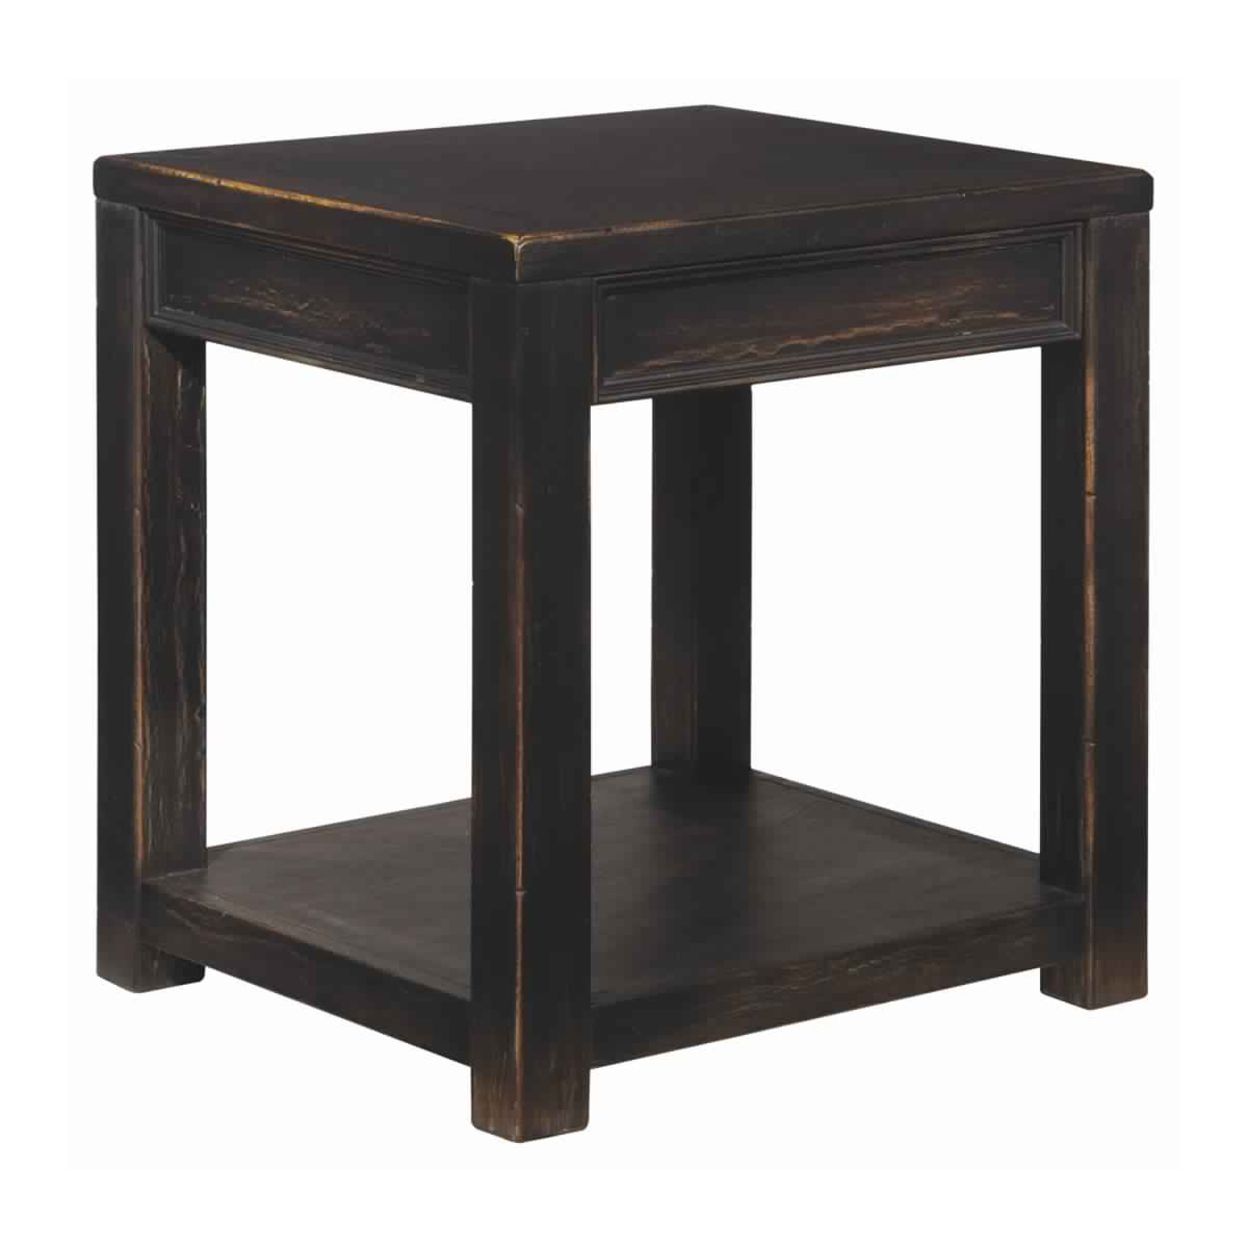 Square Shape Wooden End Table With Open Shelf, Black | Ebay Intended For Square Matte Black Console Tables (View 10 of 20)